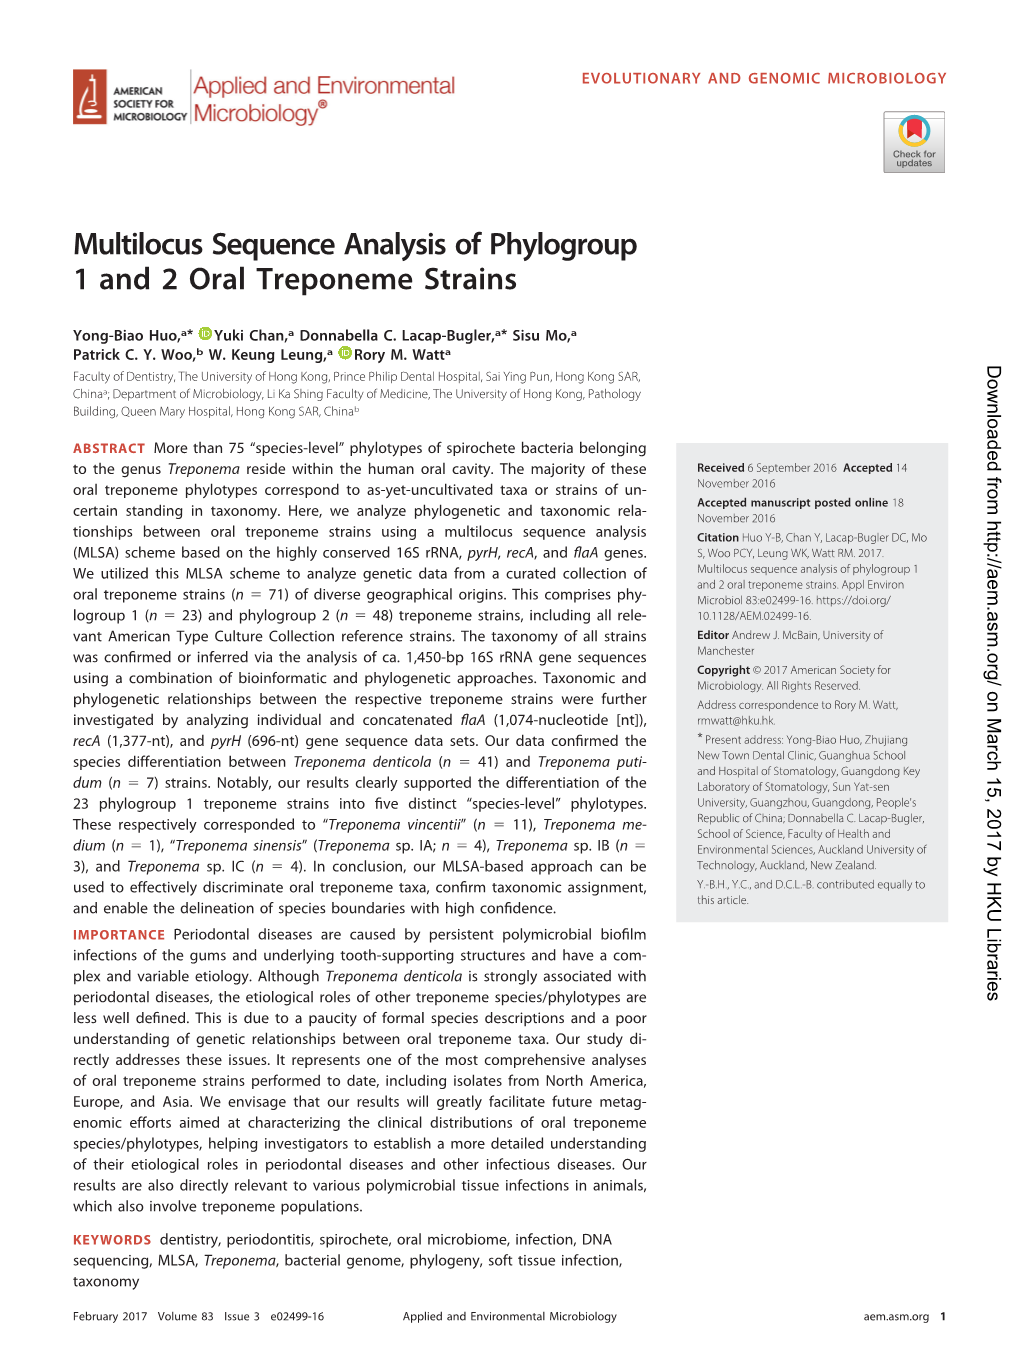 Multilocus Sequence Analysis of Phylogroup 1 and 2 Oral Treponeme Strains